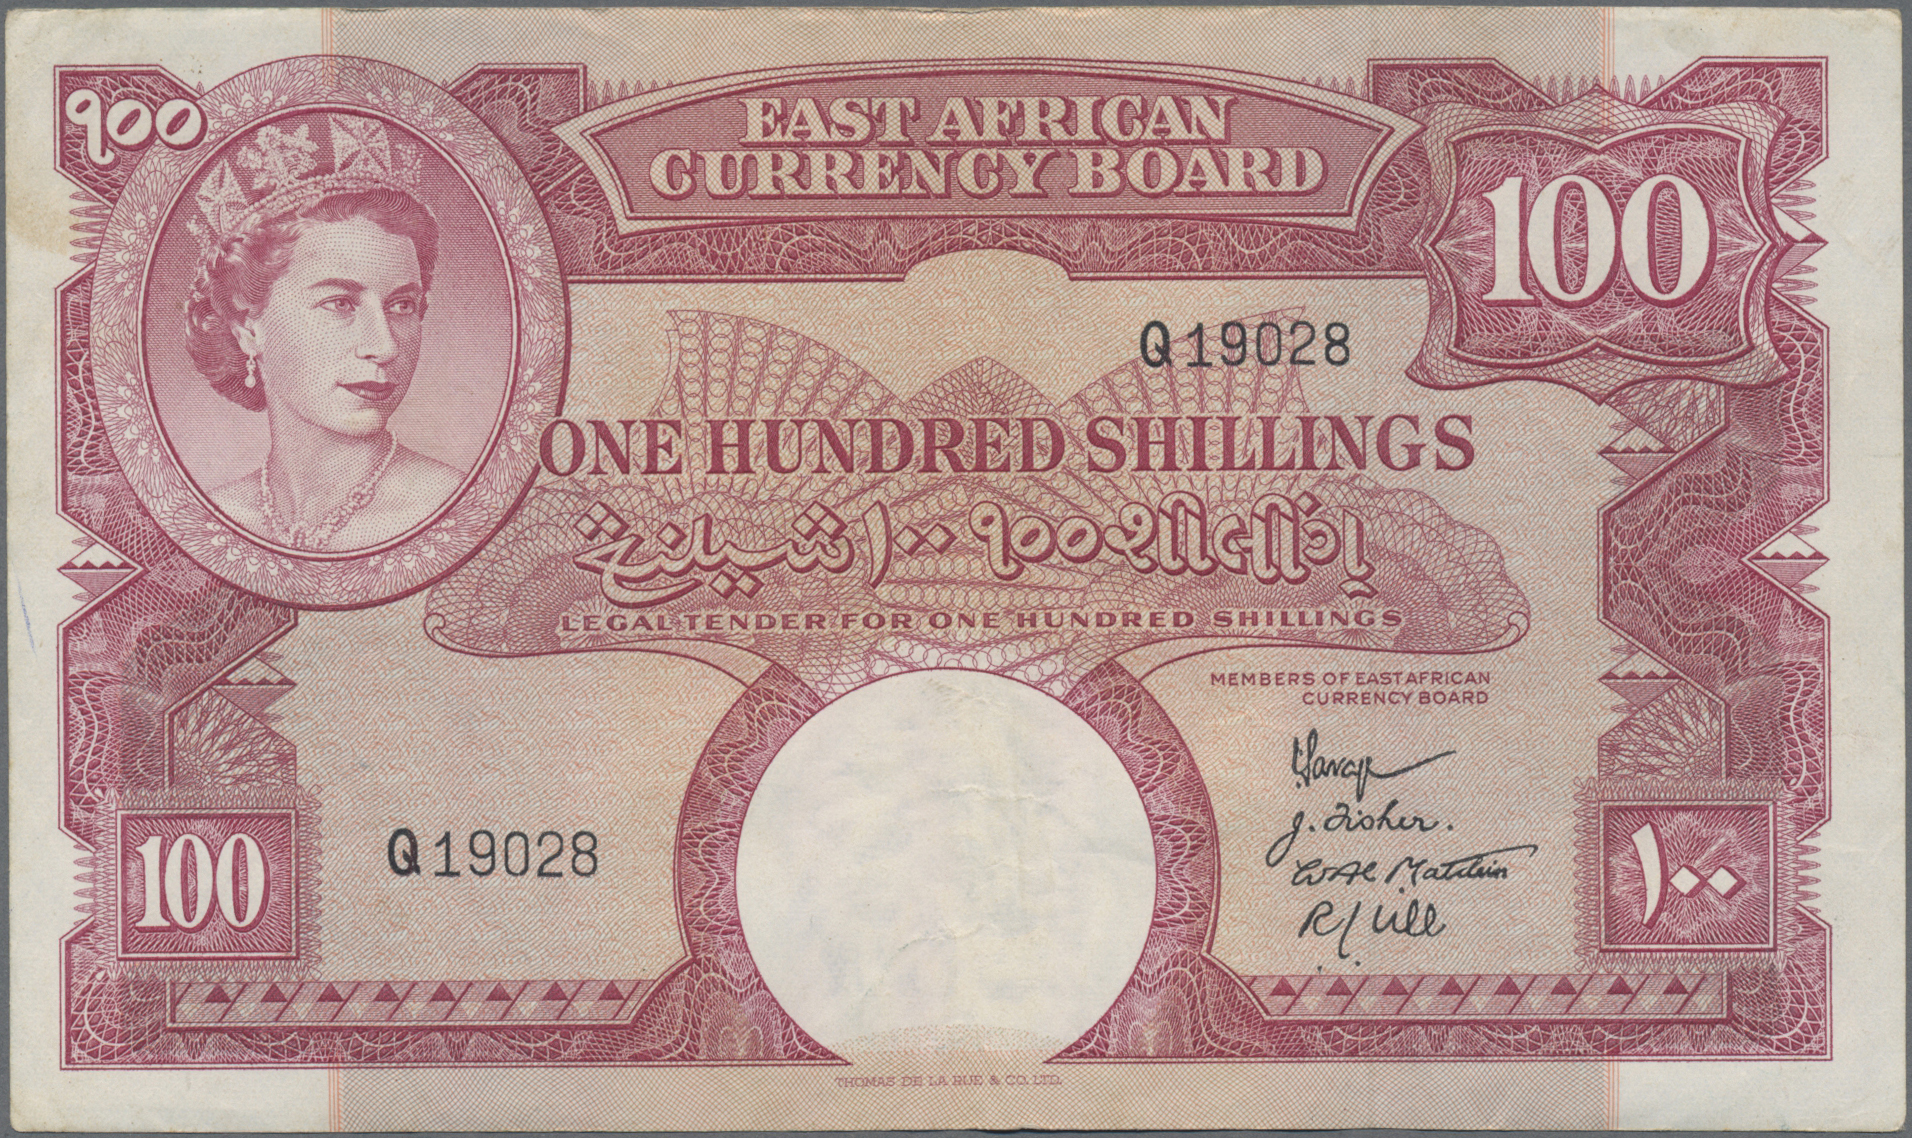 Lot 00361 - East Africa / Ost-Afrika| Banknoten  -  Auktionshaus Christoph Gärtner GmbH & Co. KG 56th AUCTION - Day 1